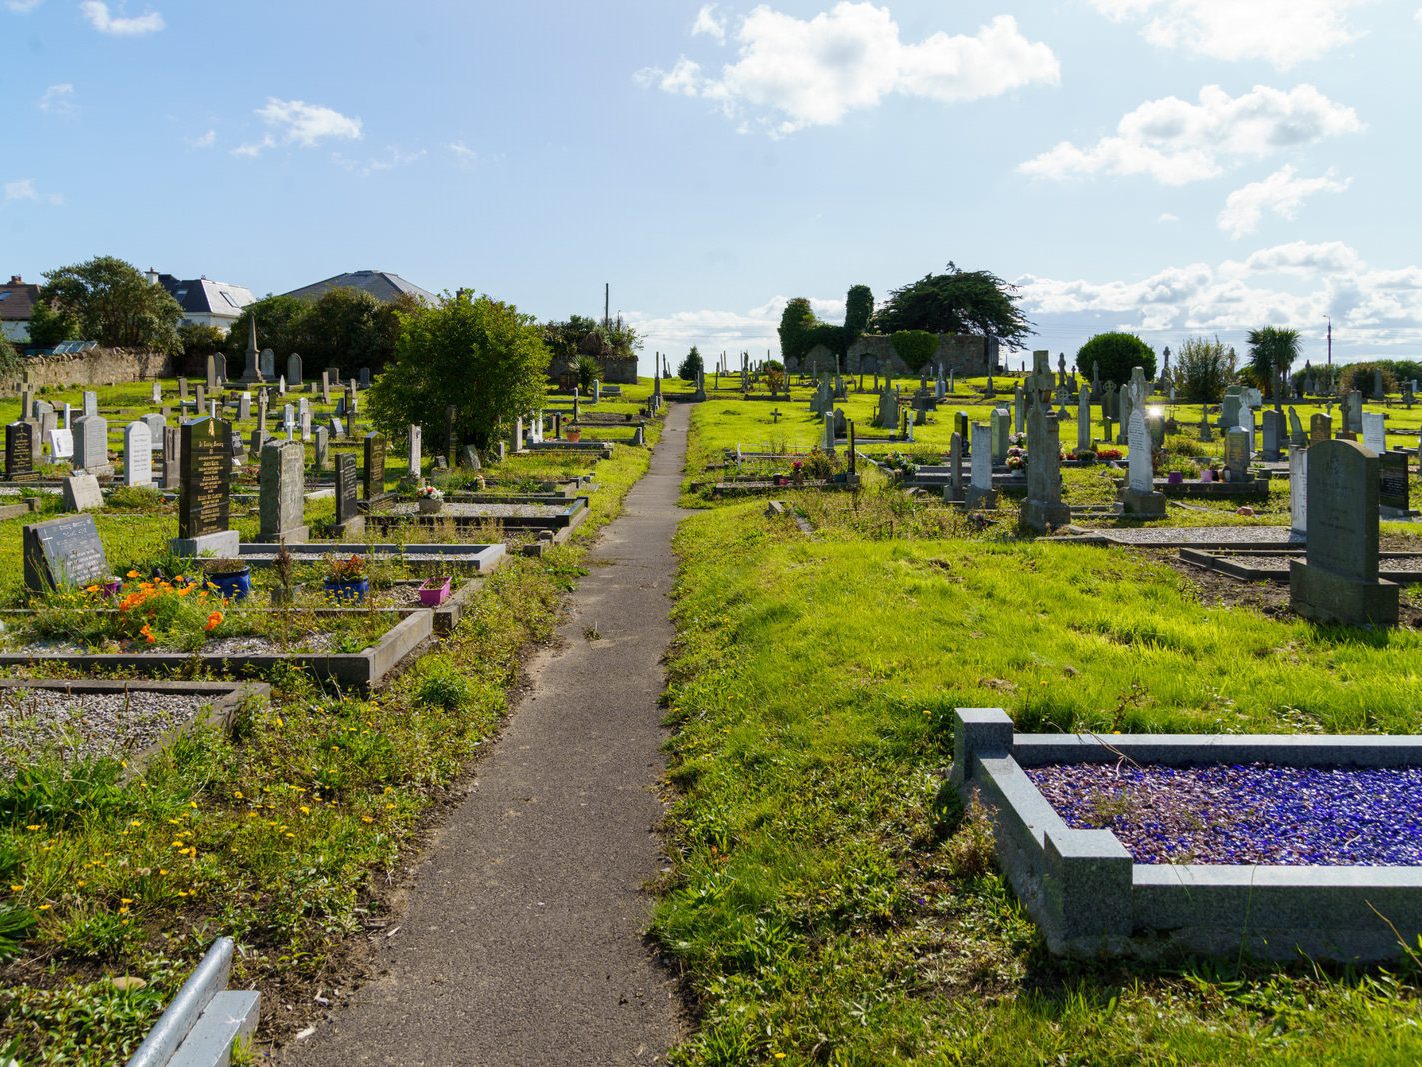 TODAY I MANAGED TO VISIT KILBARRACK CEMETERY [AFTER A NUMBER OF FAILED ATTEMPTS OVER A PERIOD OF TEN YEARS] 029